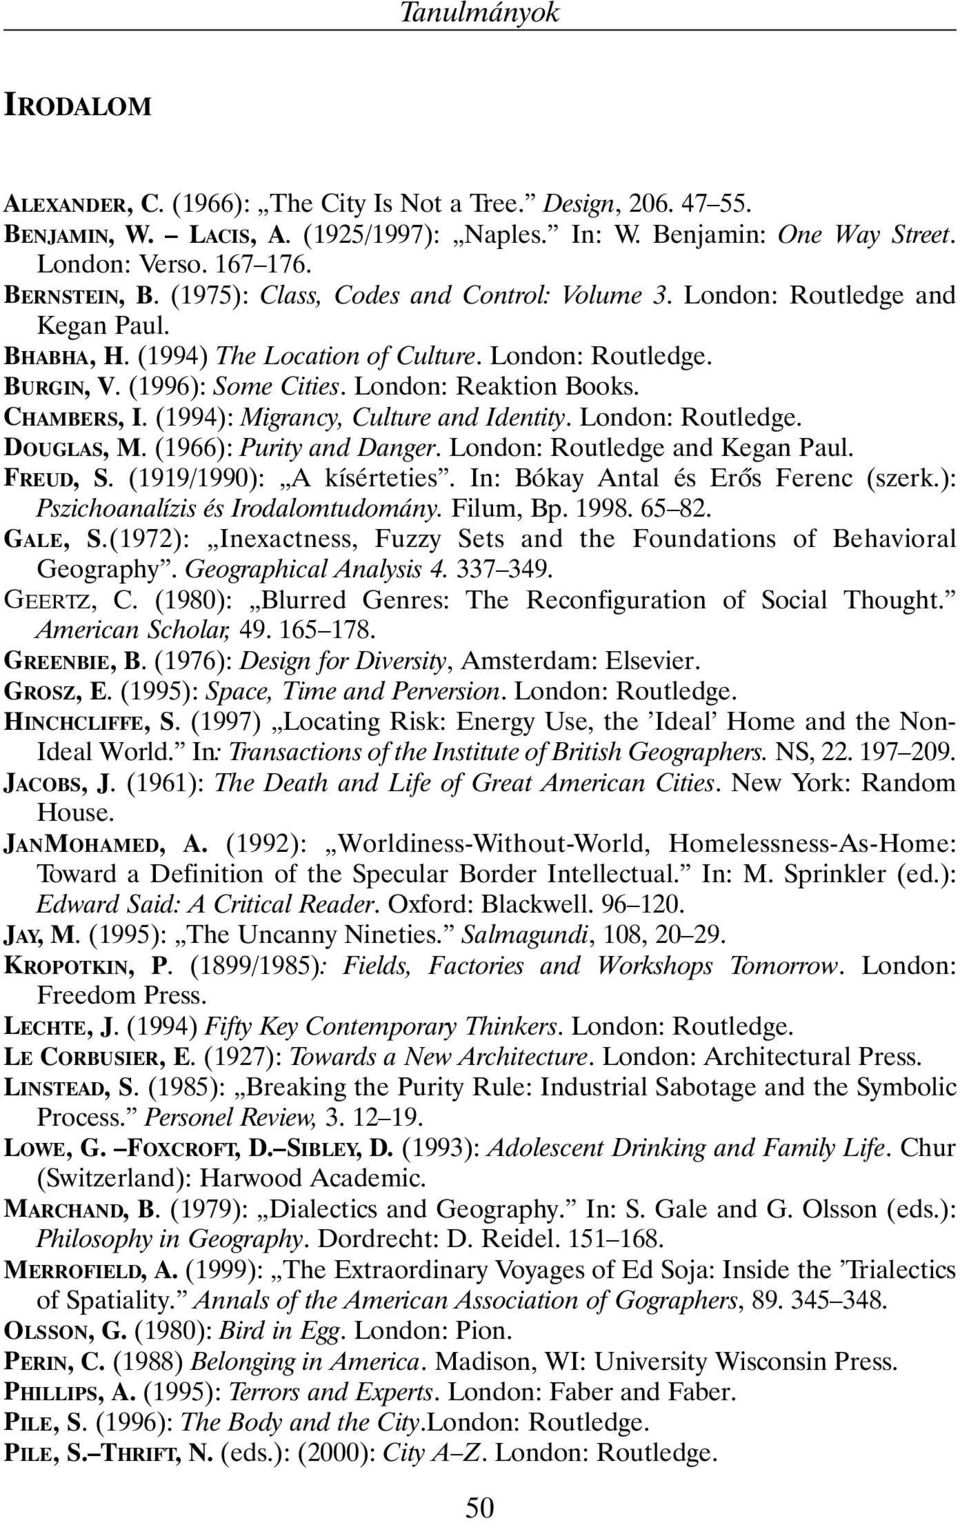 London: Reaktion Books. CHAMBERS, I. (1994): Migrancy, Culture and Identity. London: Routledge. DOUGLAS, M. (1966): Purity and Danger. London: Routledge and Kegan Paul. FREUD, S.